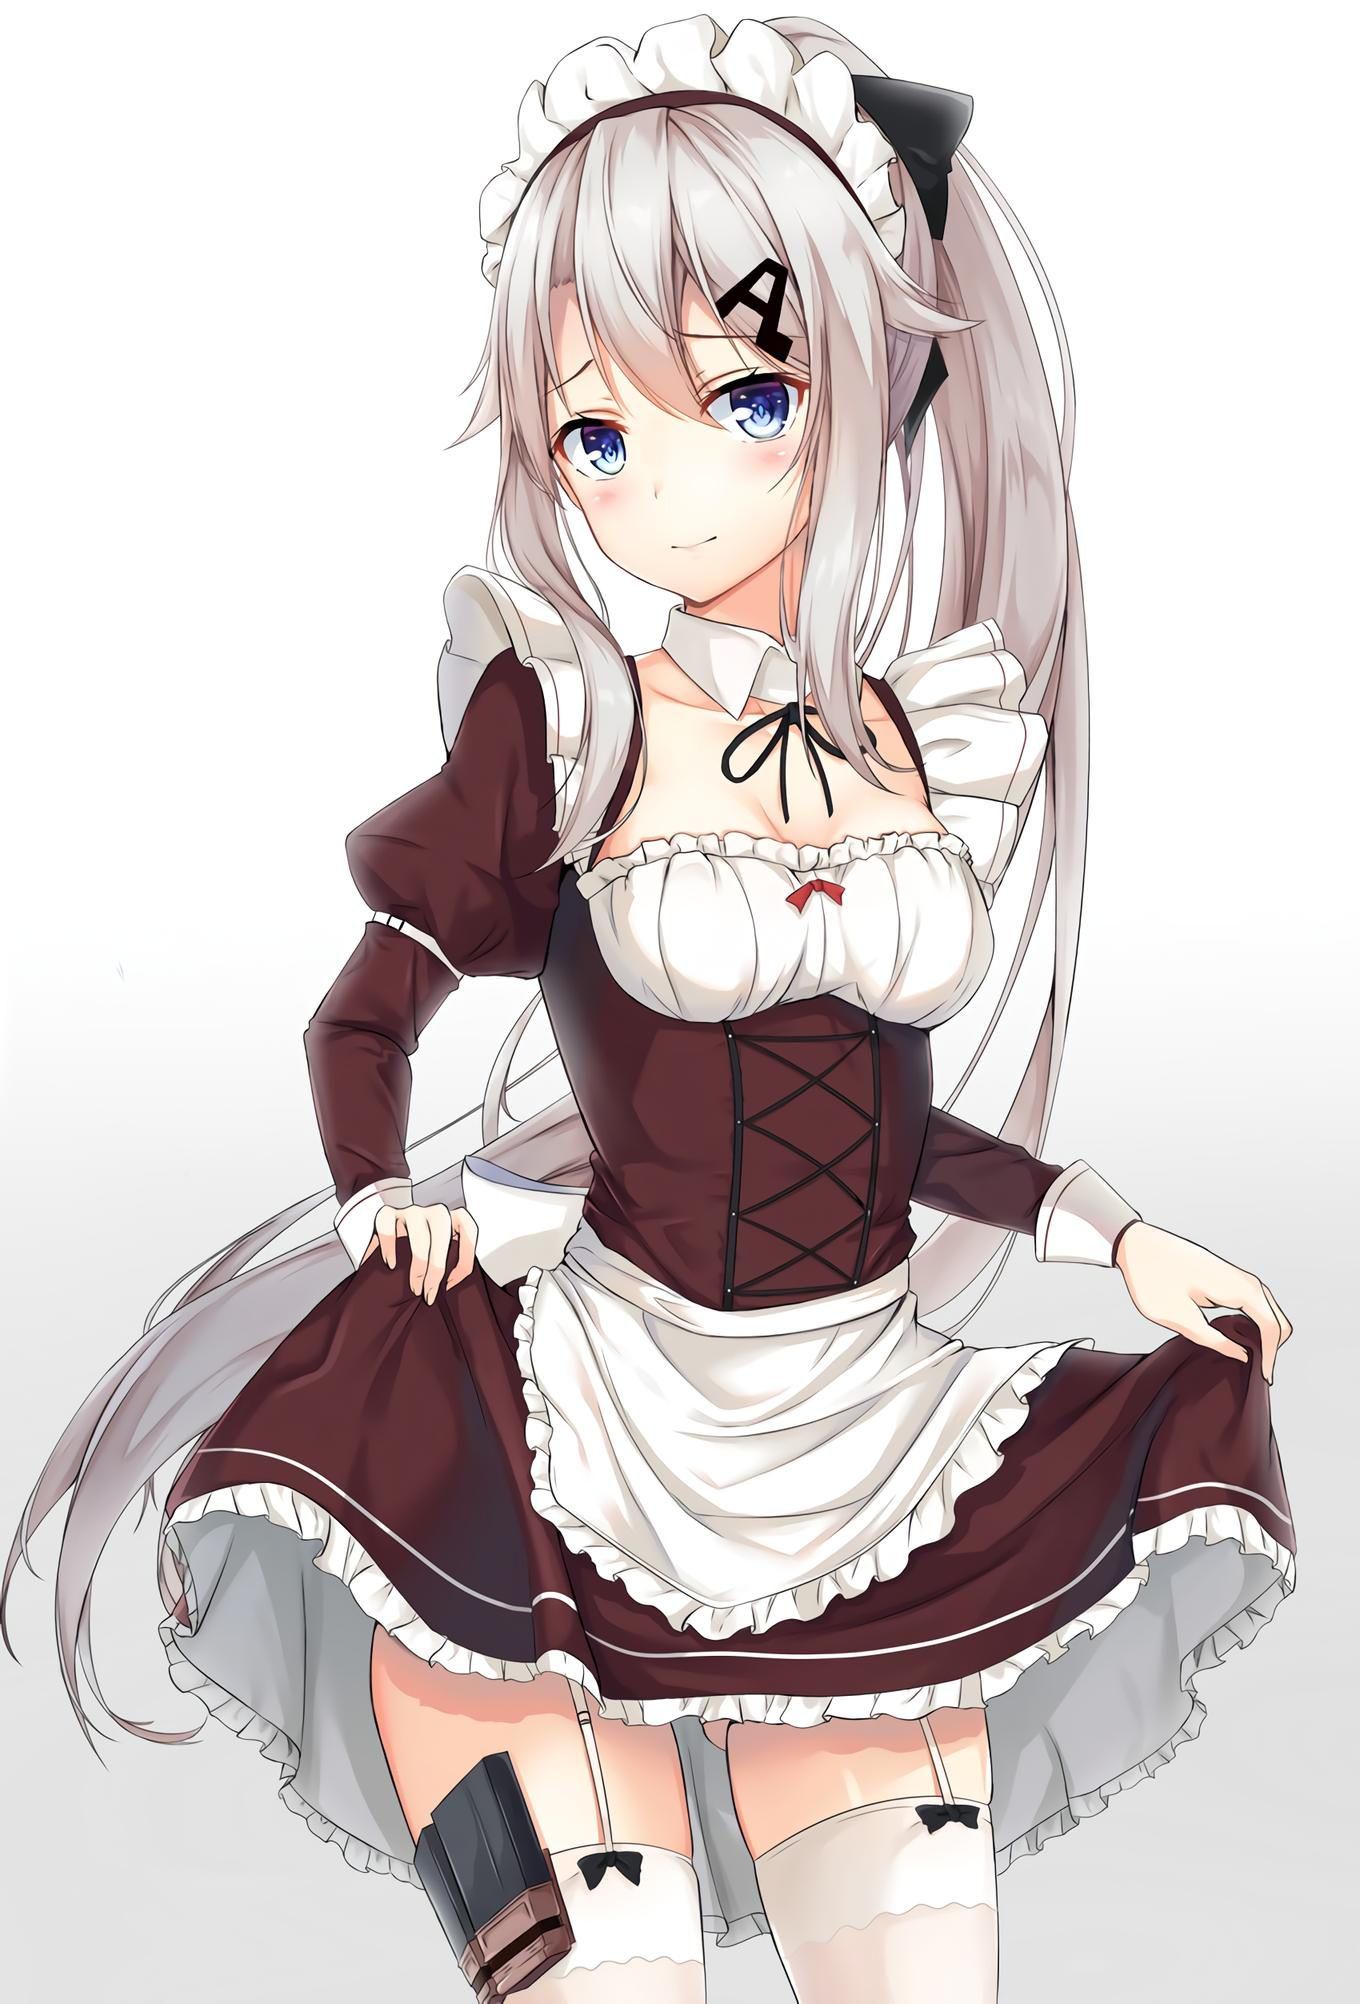 image Of Cute Anime Girl In Maid Outfit